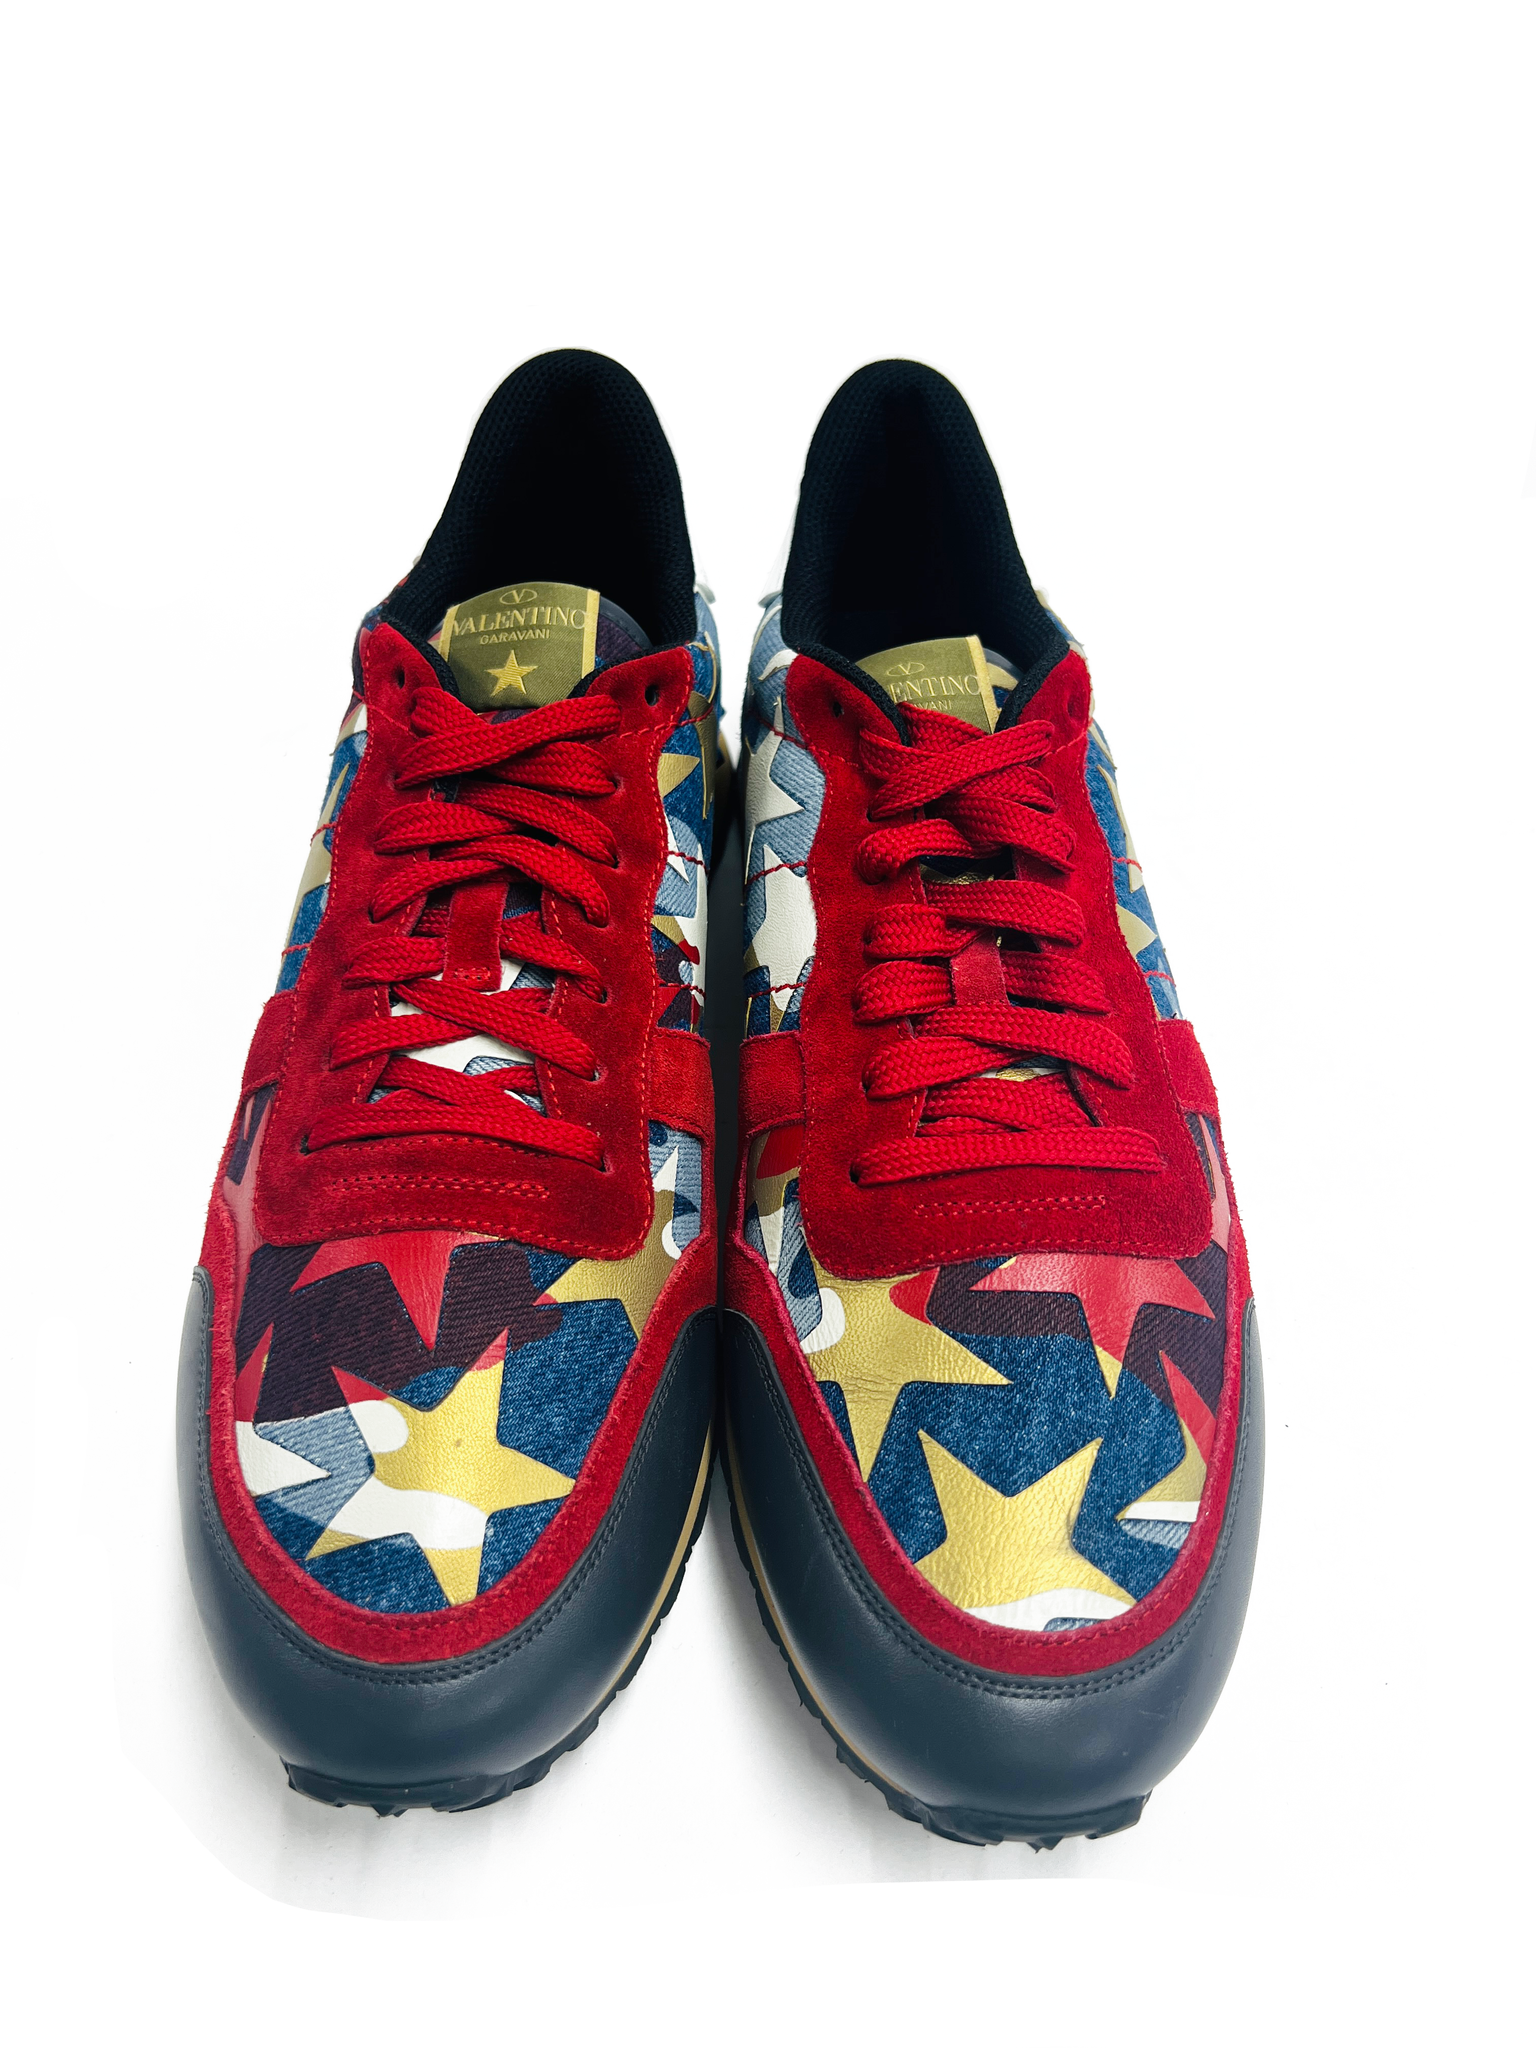 CA VALENTINO ROCKRUNNER STAR-STUDDED LEATHER SNEAKER RED/ WHITE/ BLUE CAMO STAR TRAINER-2